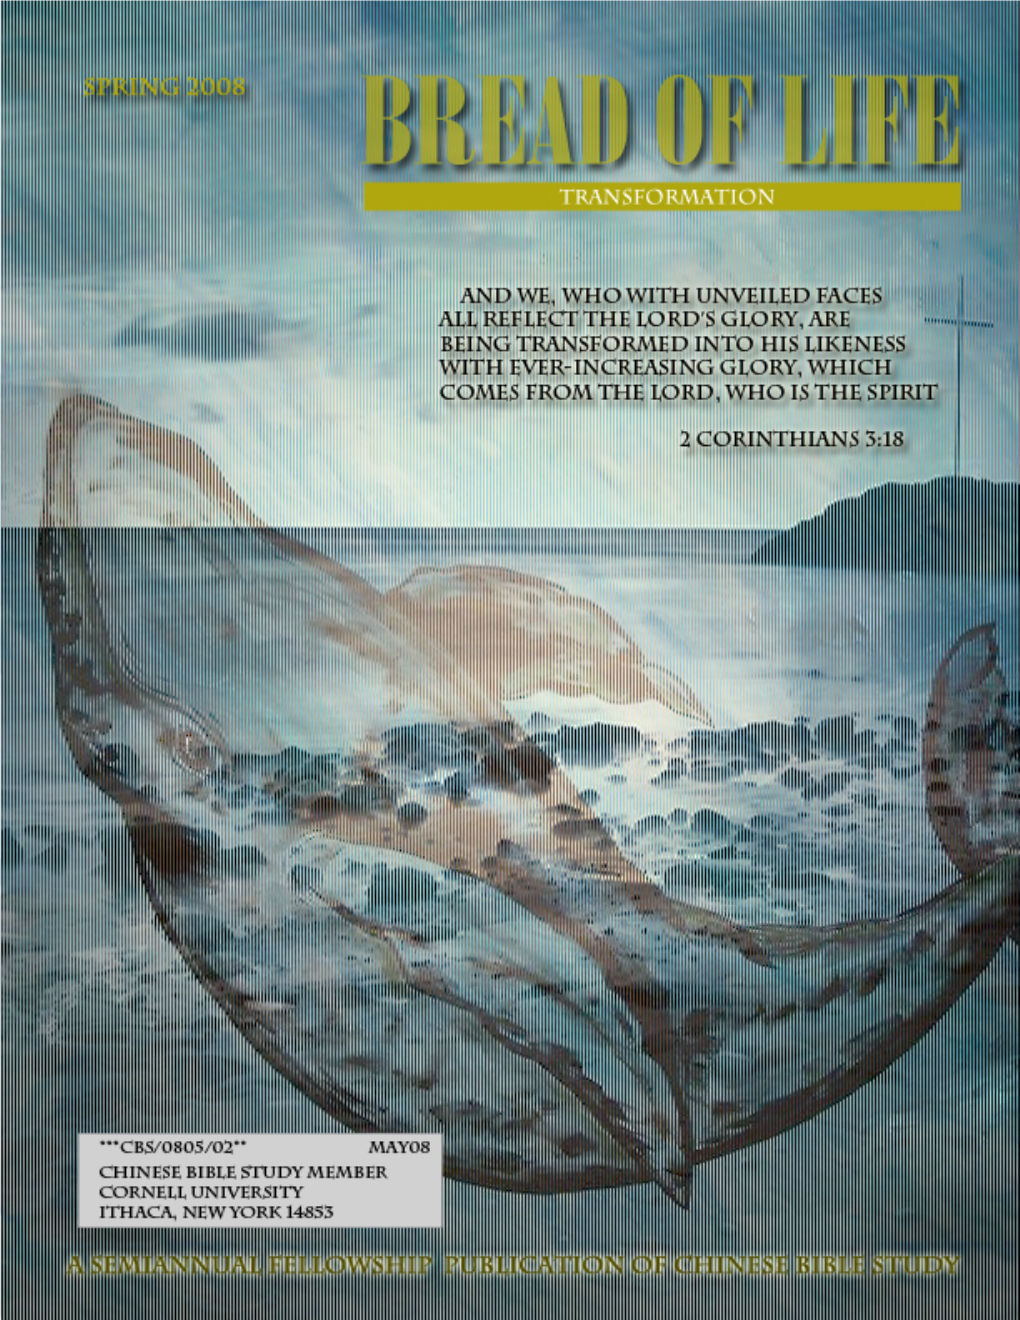 Spring 2008 Edition of Bread of Life